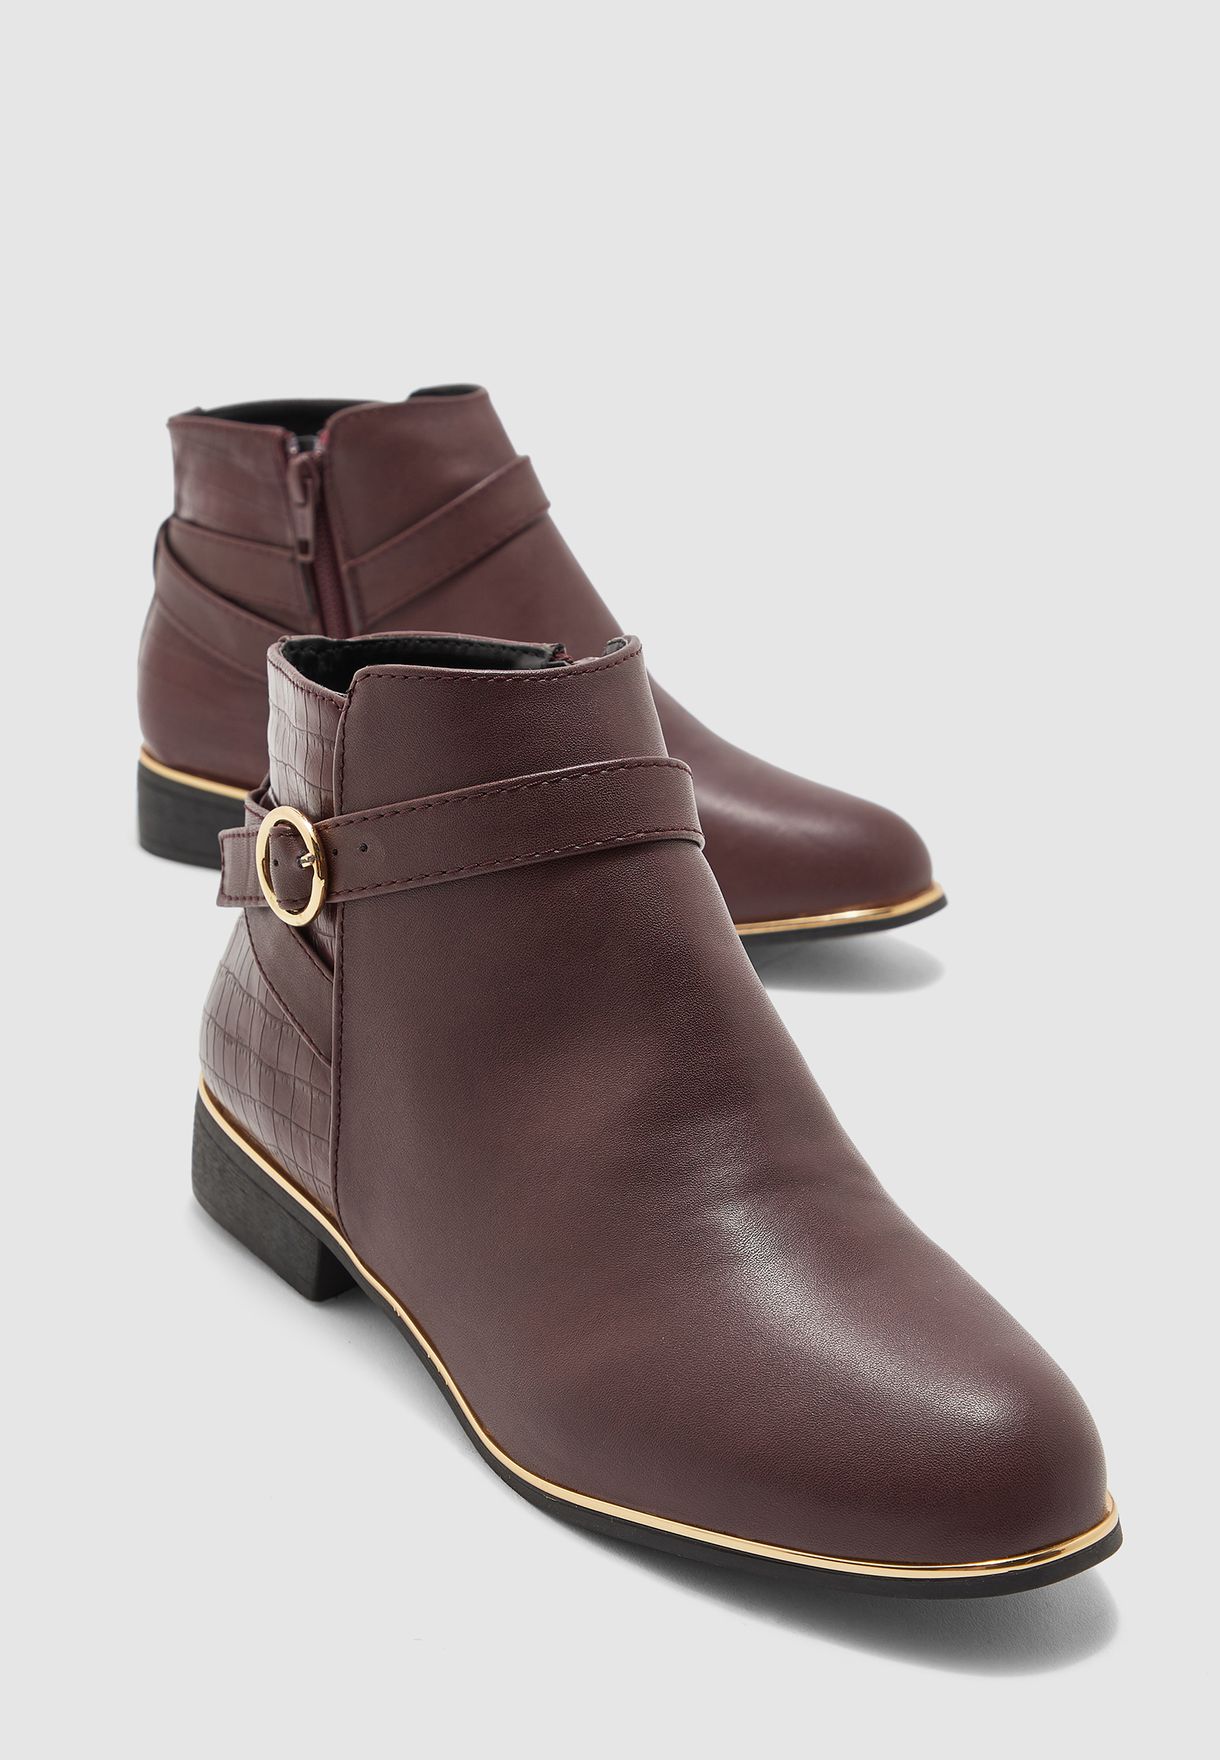 dorothy perkins wide fit boots